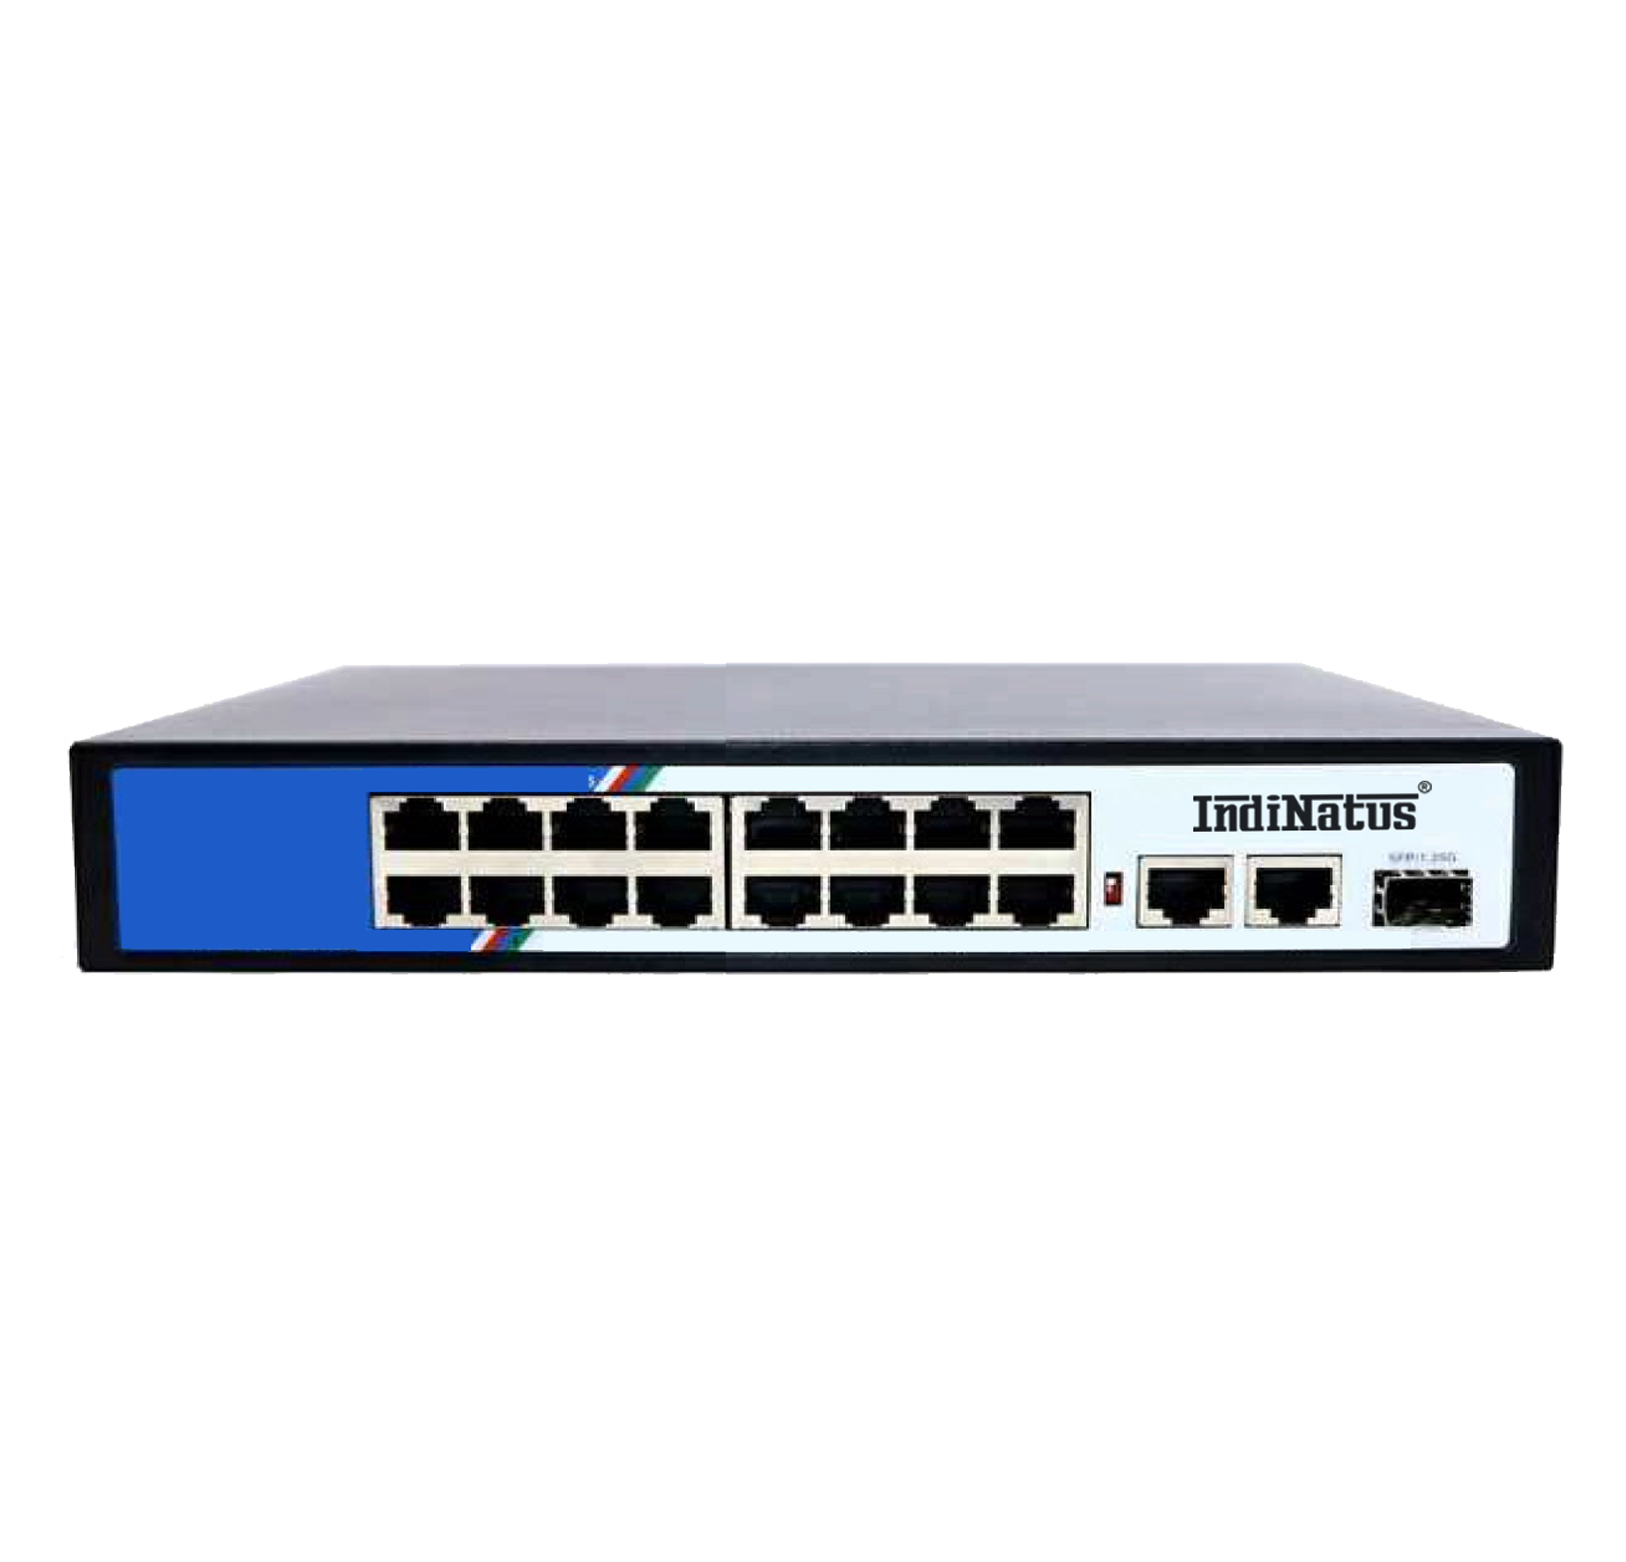  24Port Gigabit PoE + 2-Port Gigabit SFP + 2-Port Gigabit Copper Ethernet Switch, IN-24P2G-SFP-420W,  IndiNatus® India Private Limited - India Ka Apna Brand, Indian CCTV  Brand,  Make In India CCTV camera, Make in india cctv camera brand available on gem portal, IP Network Camera, Indian brand CCTV Camera, Best OEM Of CCTV in India      